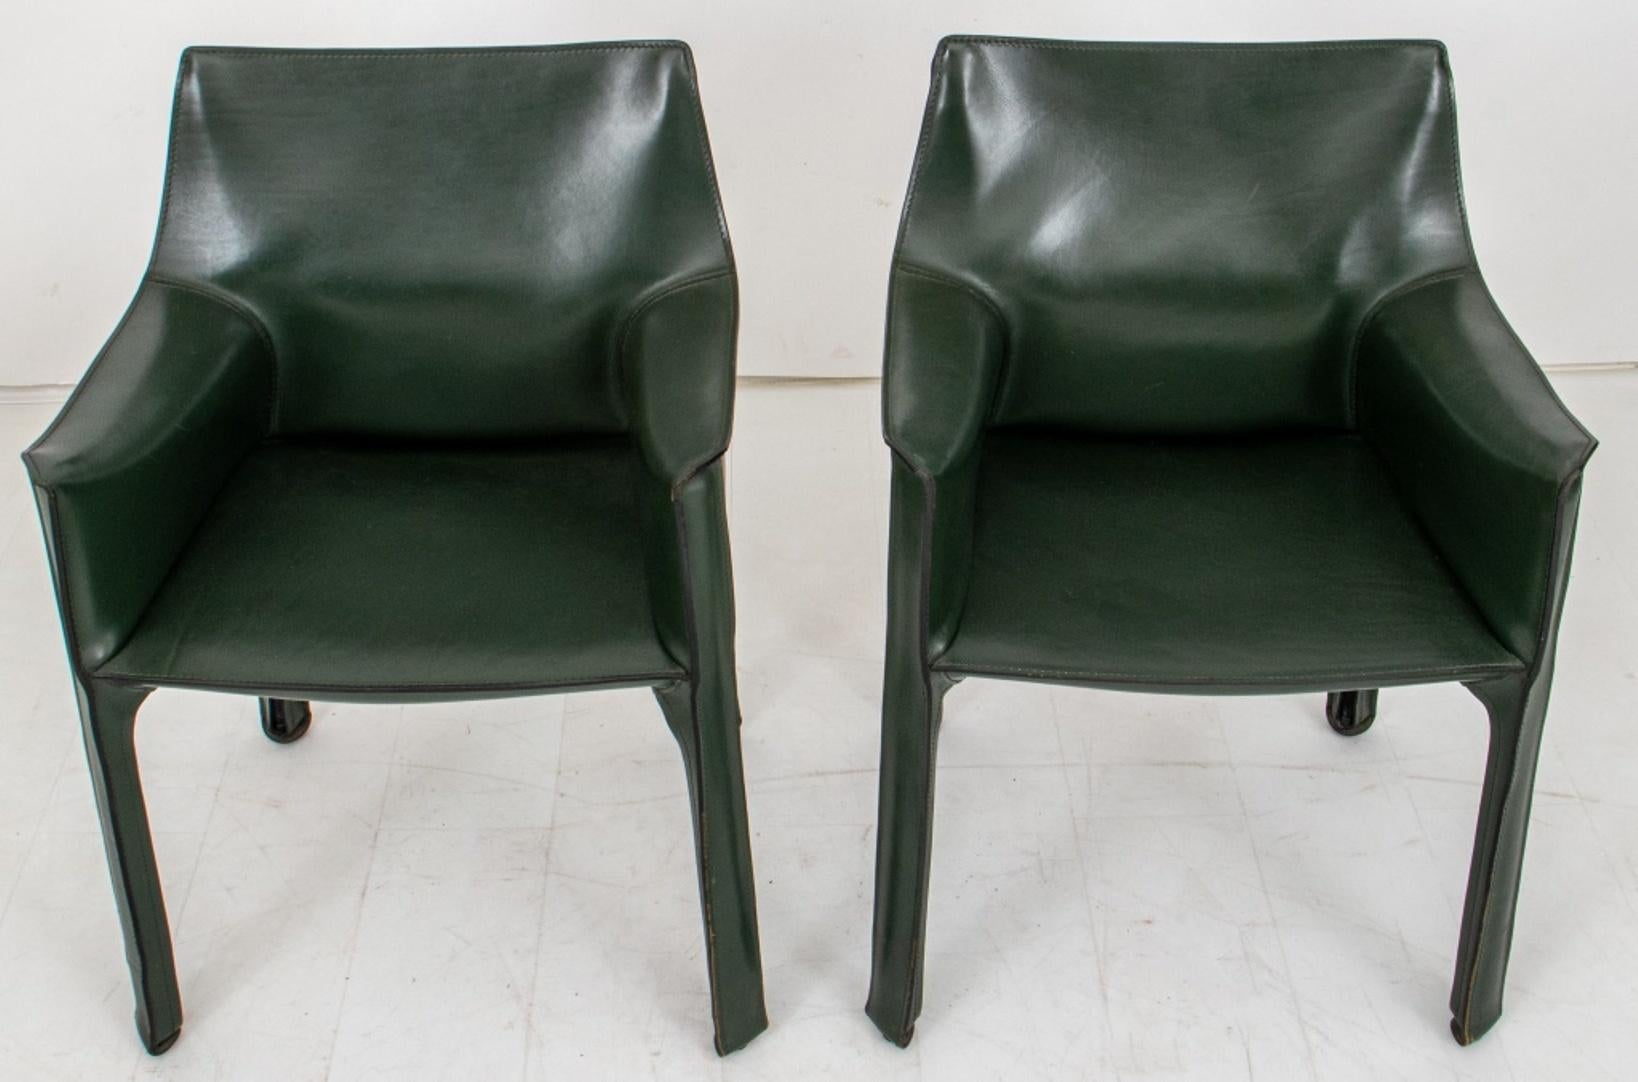 Mario Bellini (Italian, b. 1939) for Cassina Cab 413  arm chairs, 2, in deep green leather. In good condition. Wear consistent with age and use.

Dimensions: 31